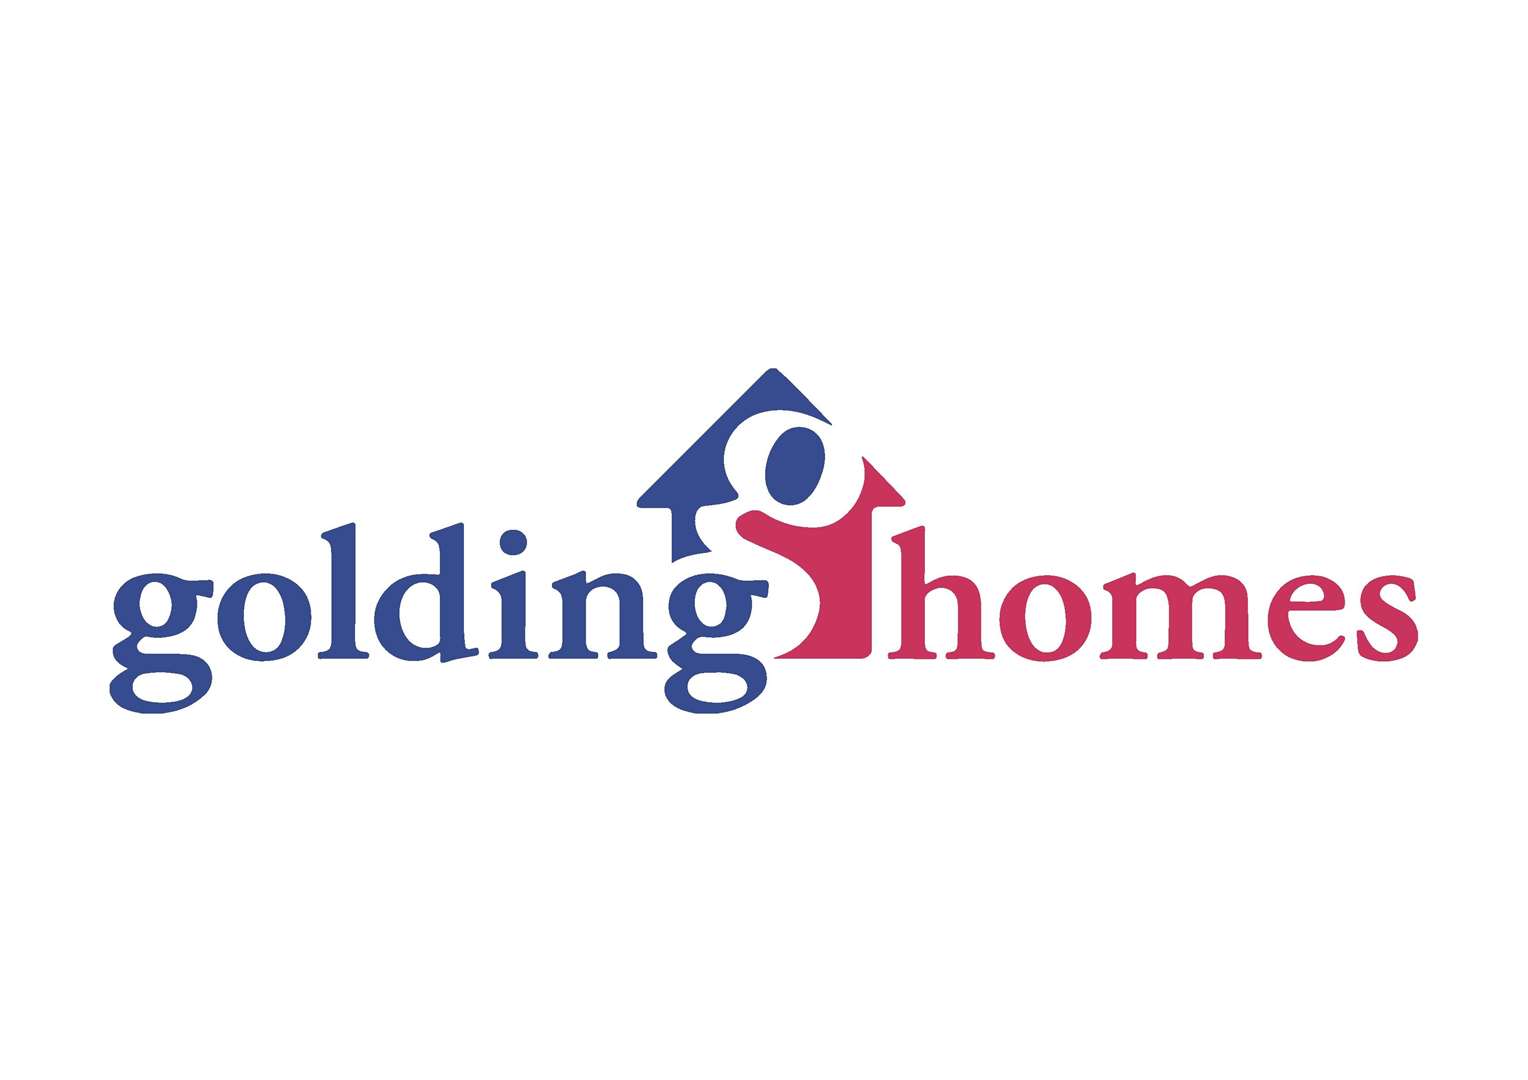 Golding Homes took over Maidstone council's housing stock in 2004